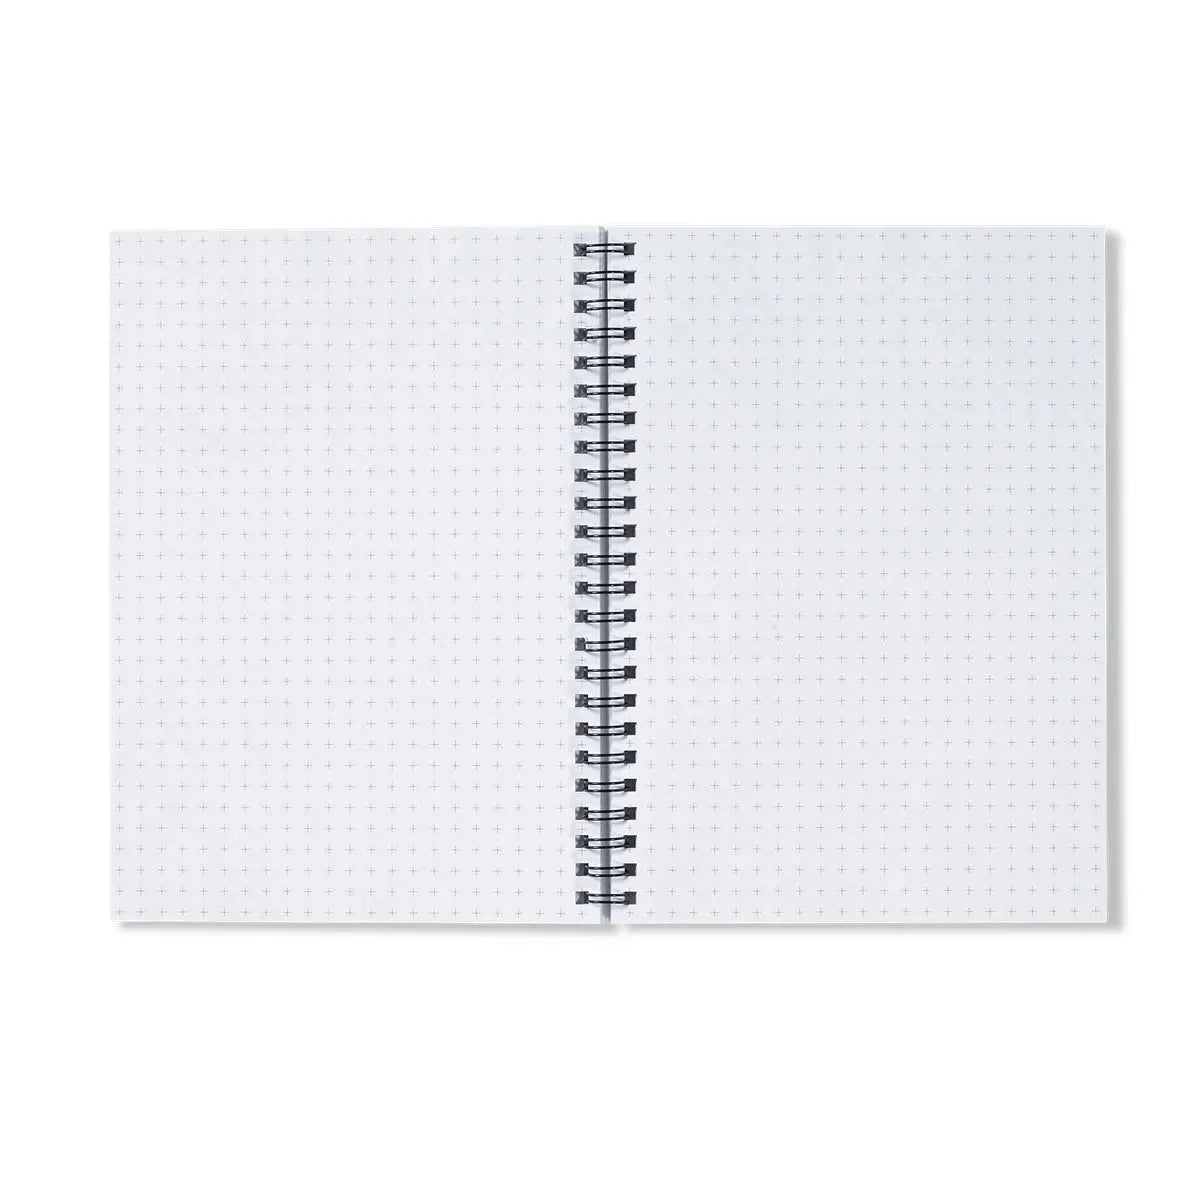 In Bloom Too Notebook - Notebooks & Notepads - Aesthetic Art